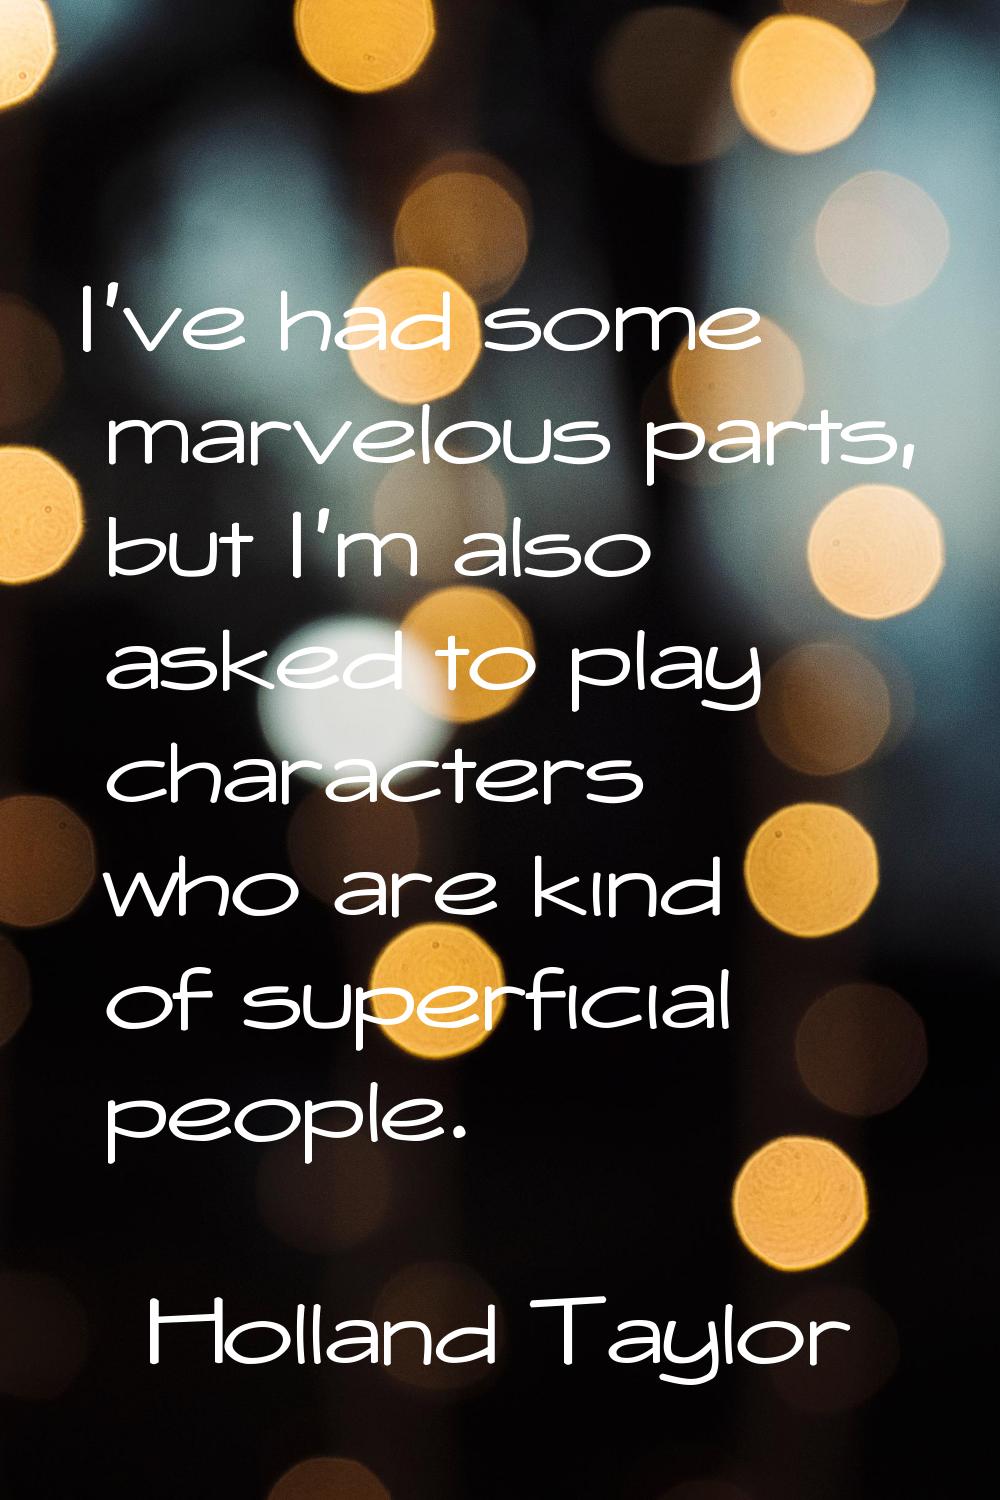 I've had some marvelous parts, but I'm also asked to play characters who are kind of superficial pe